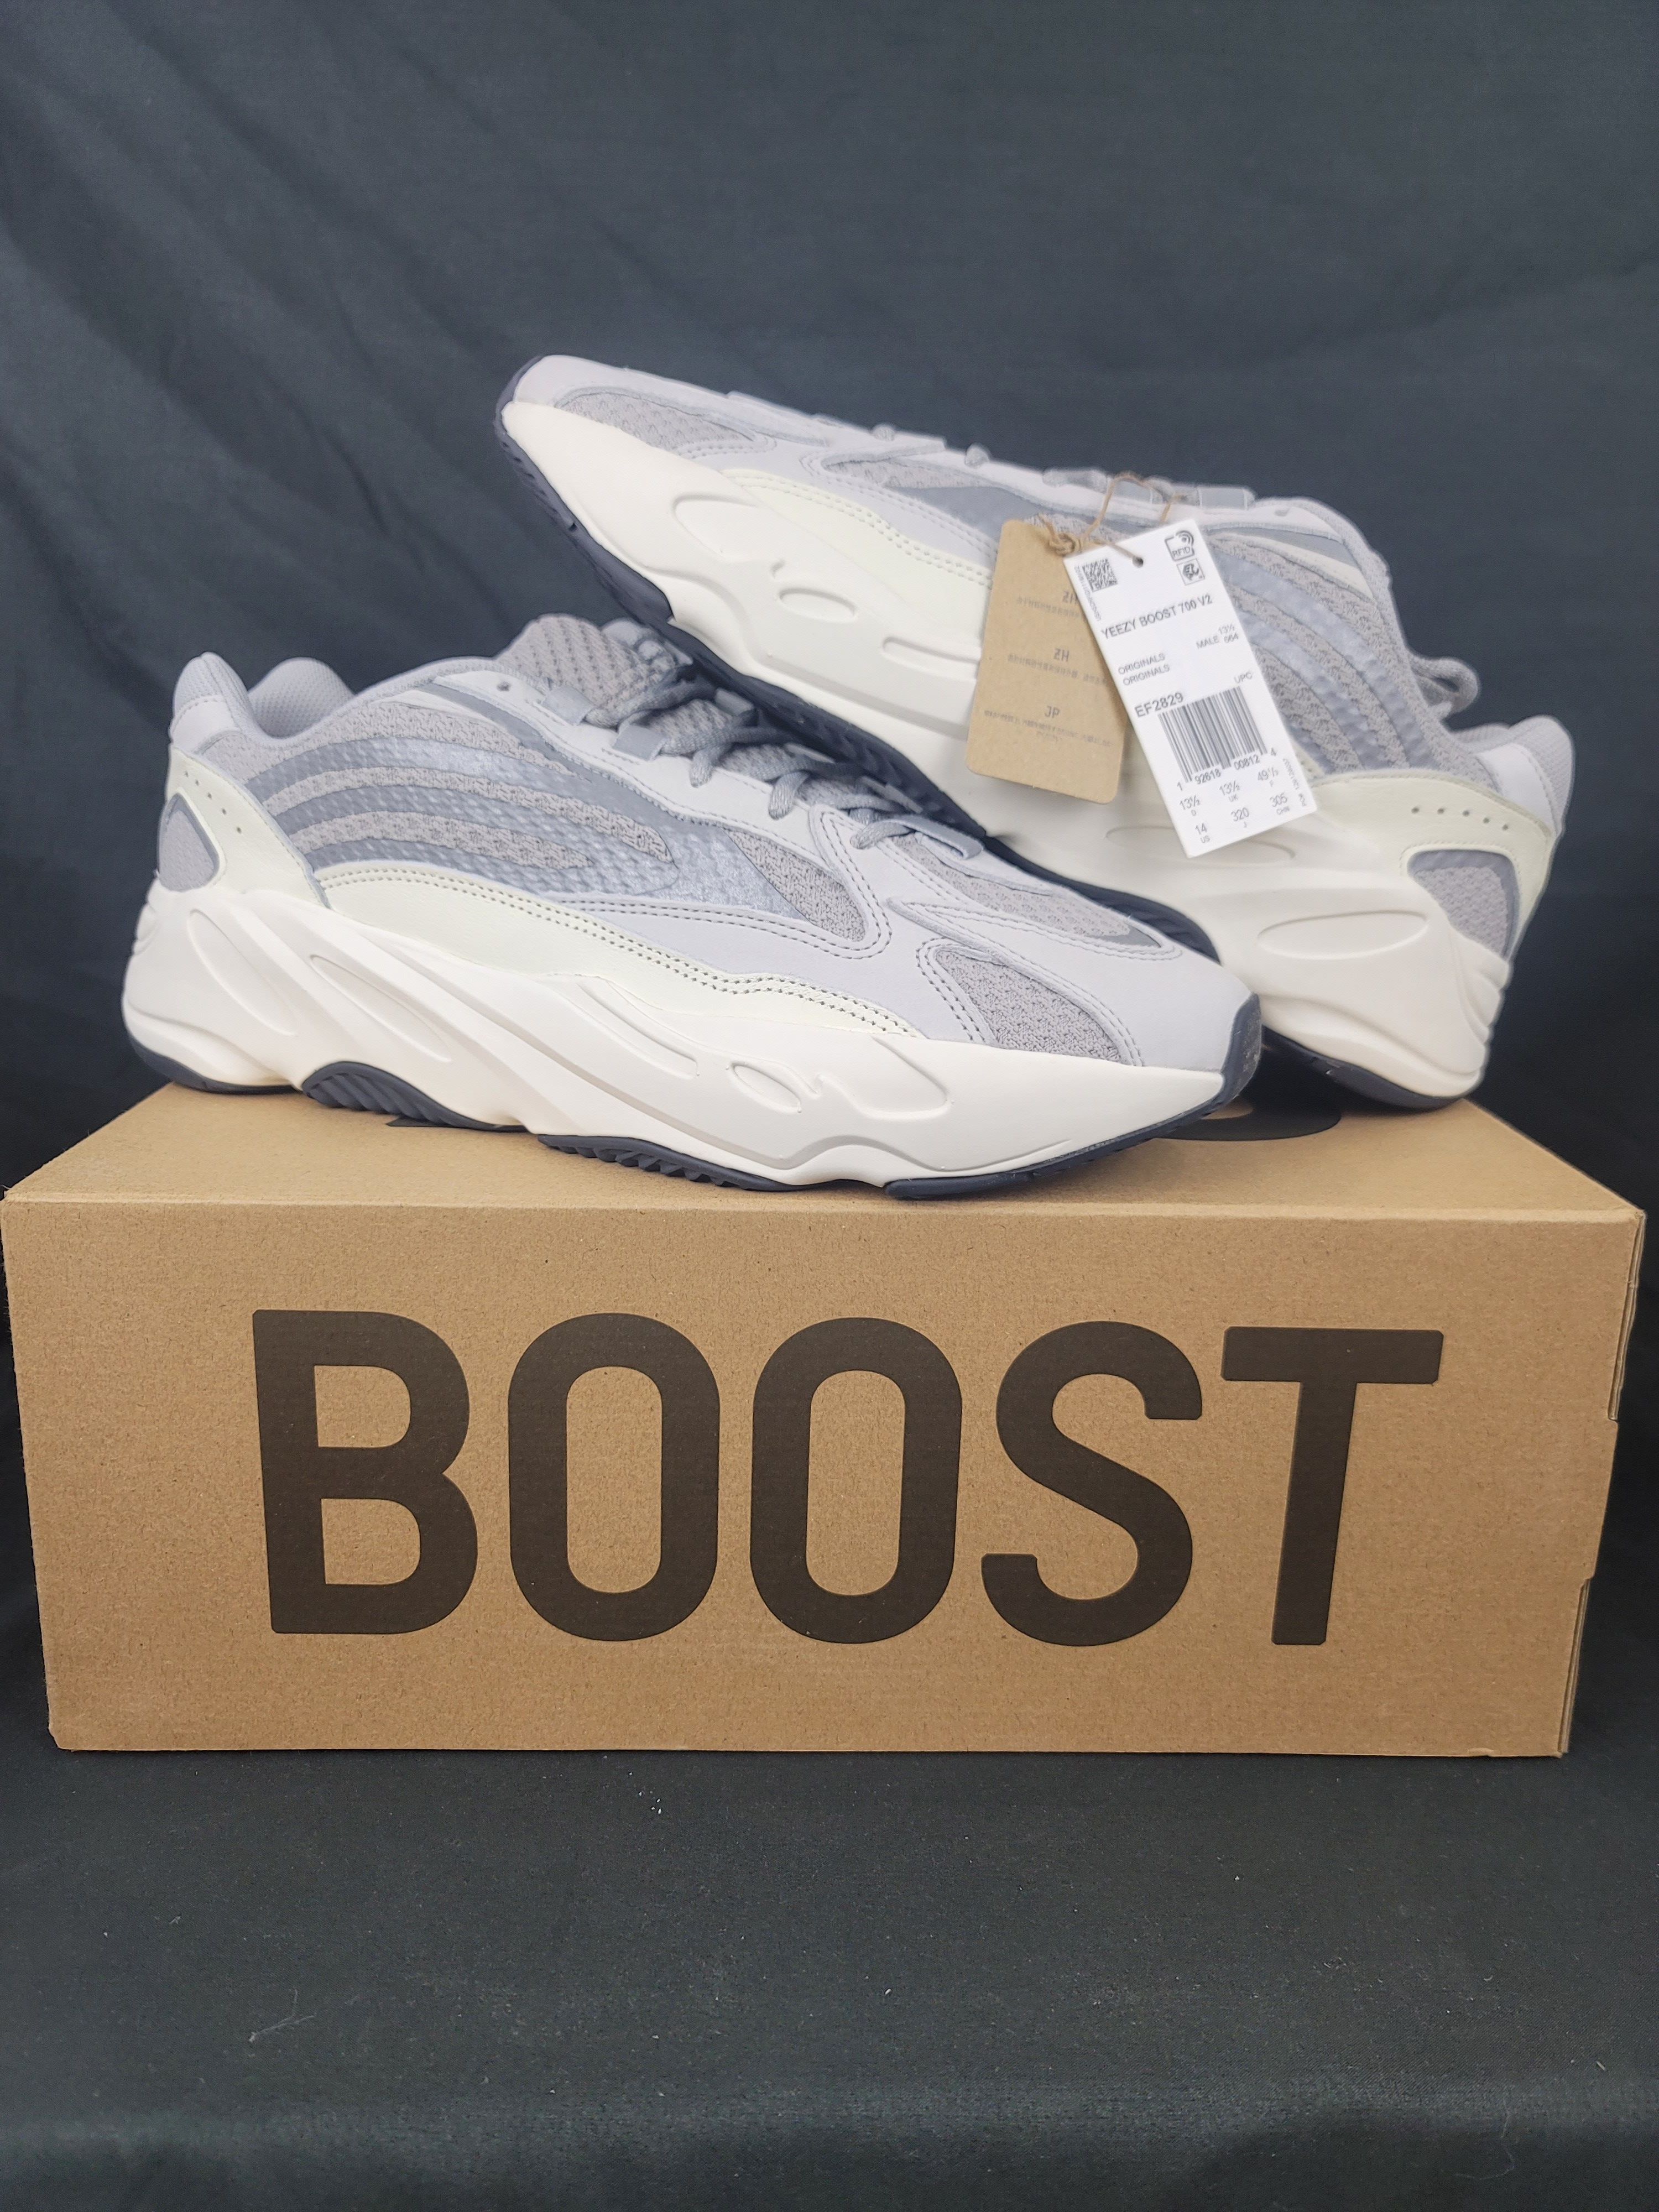 Pre-owned Adidas X Kanye West Adidas Yeezy Boost 700 V2 Static Kanye West Confirmed Order Shoes